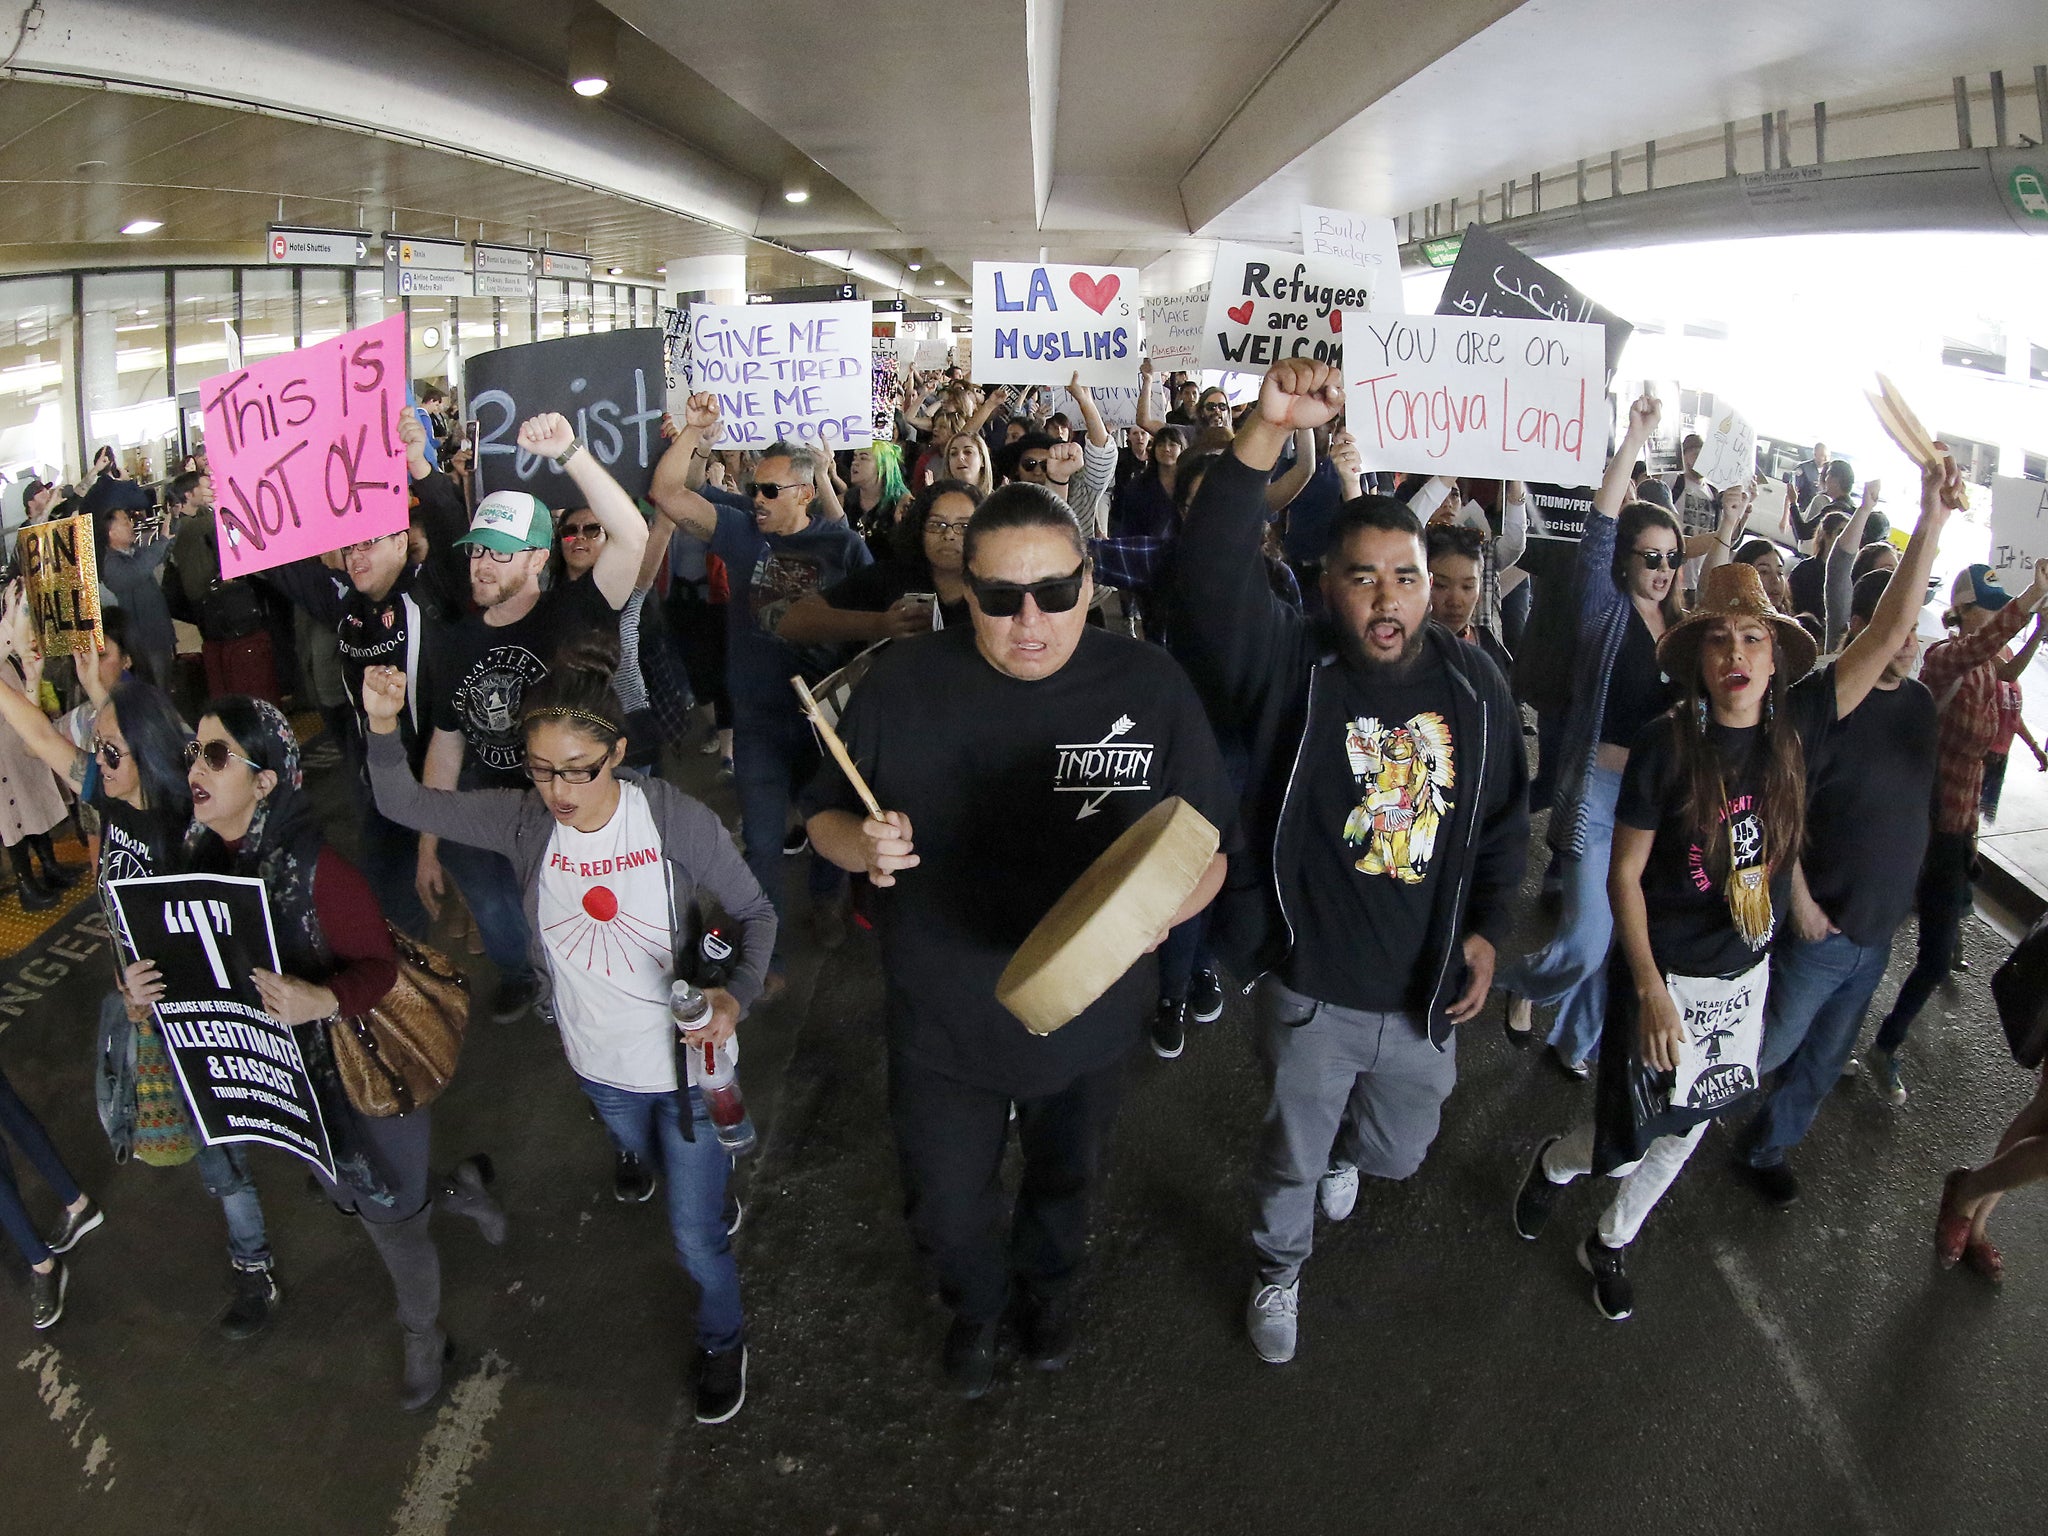 Demonstrators march on the lower roadway as protests against President Donald Trump's executive order banning travel to the U.S